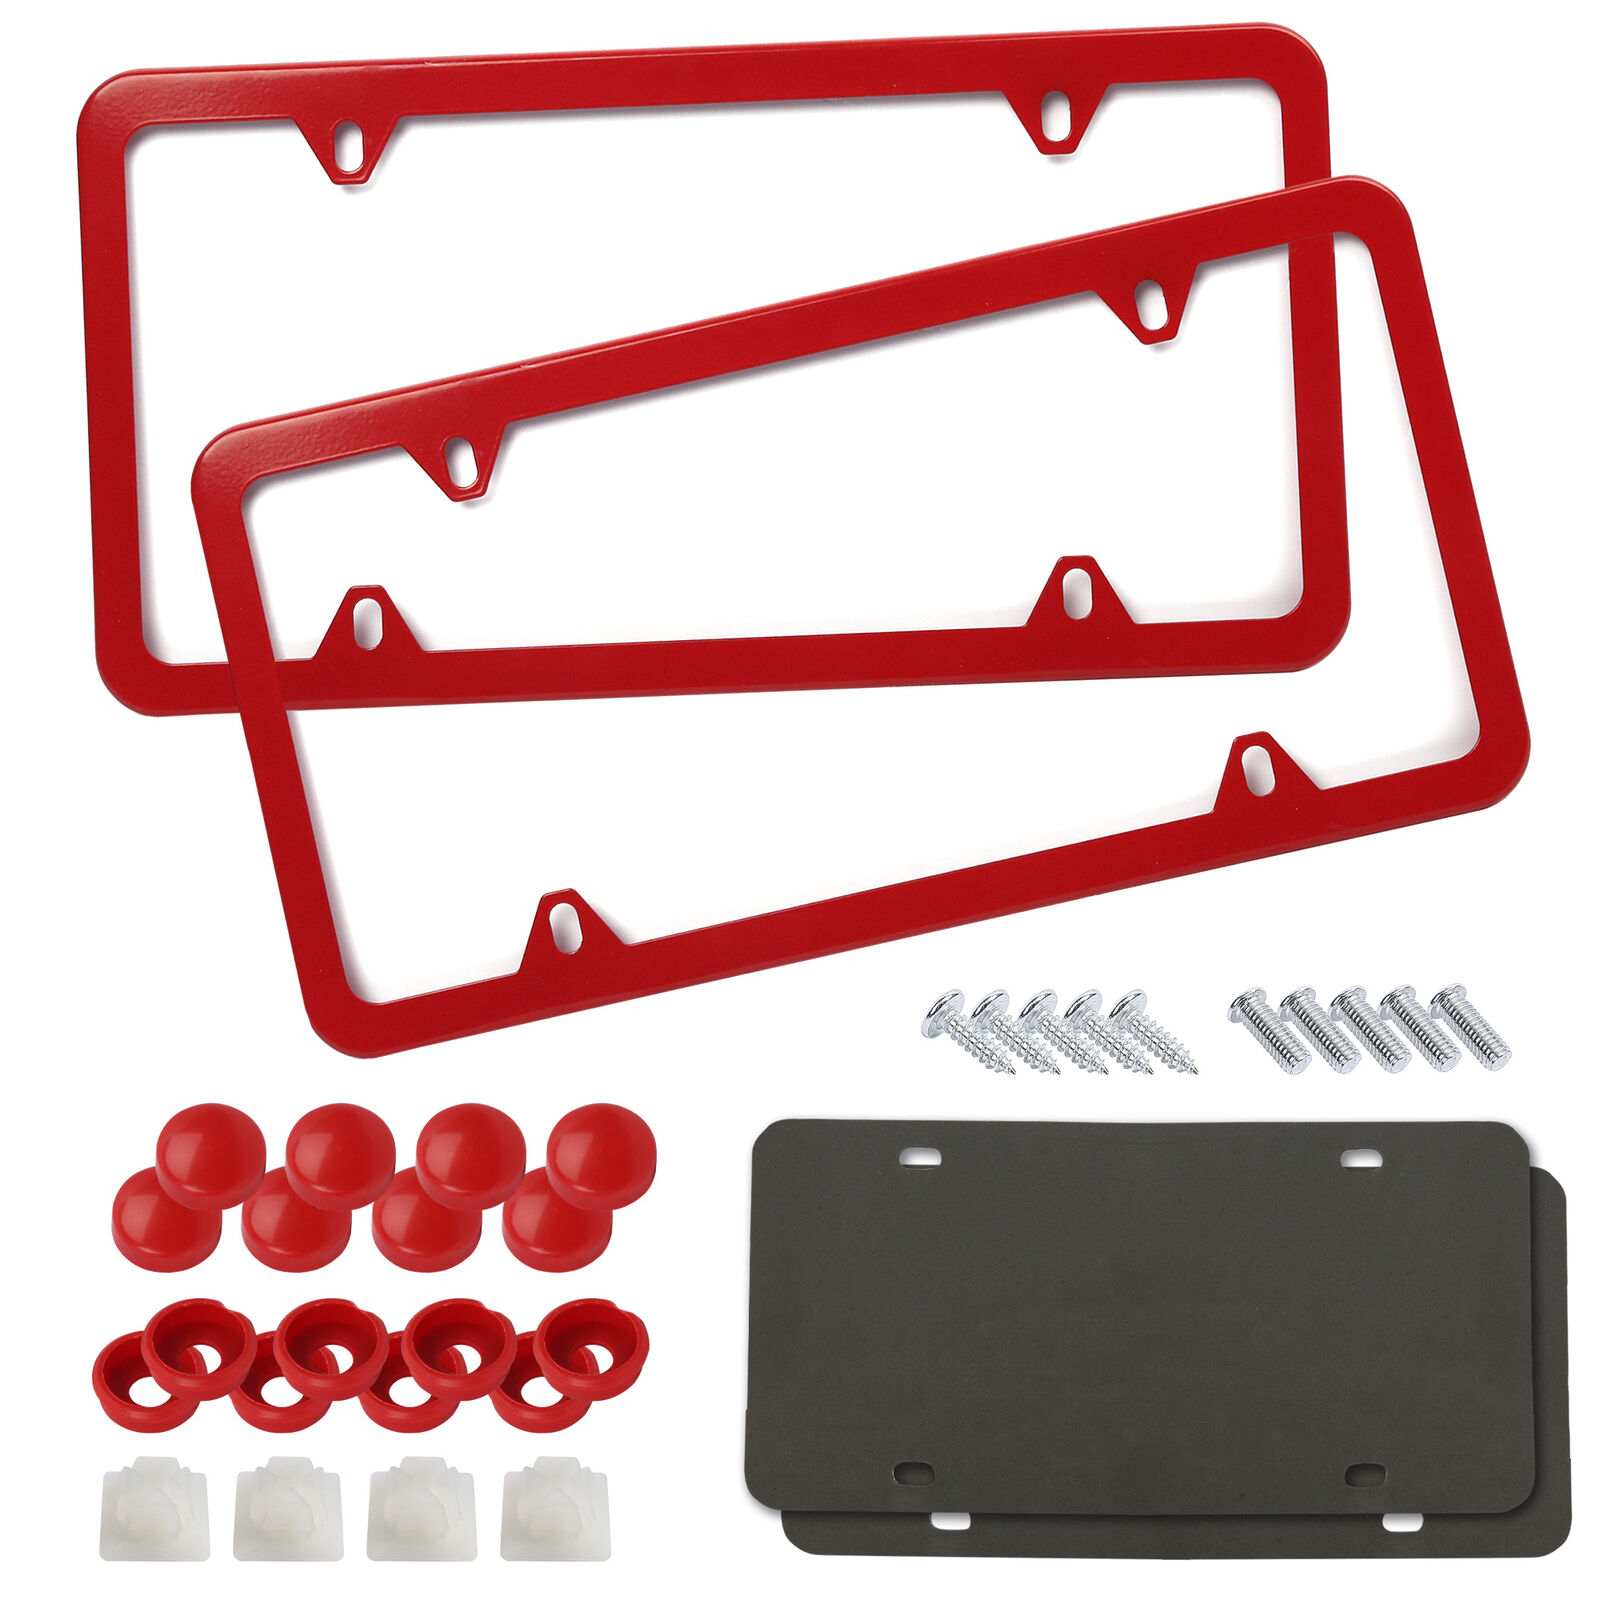 Red License Plate Frames Car License Plate Covers Holder Front & Rear US Size